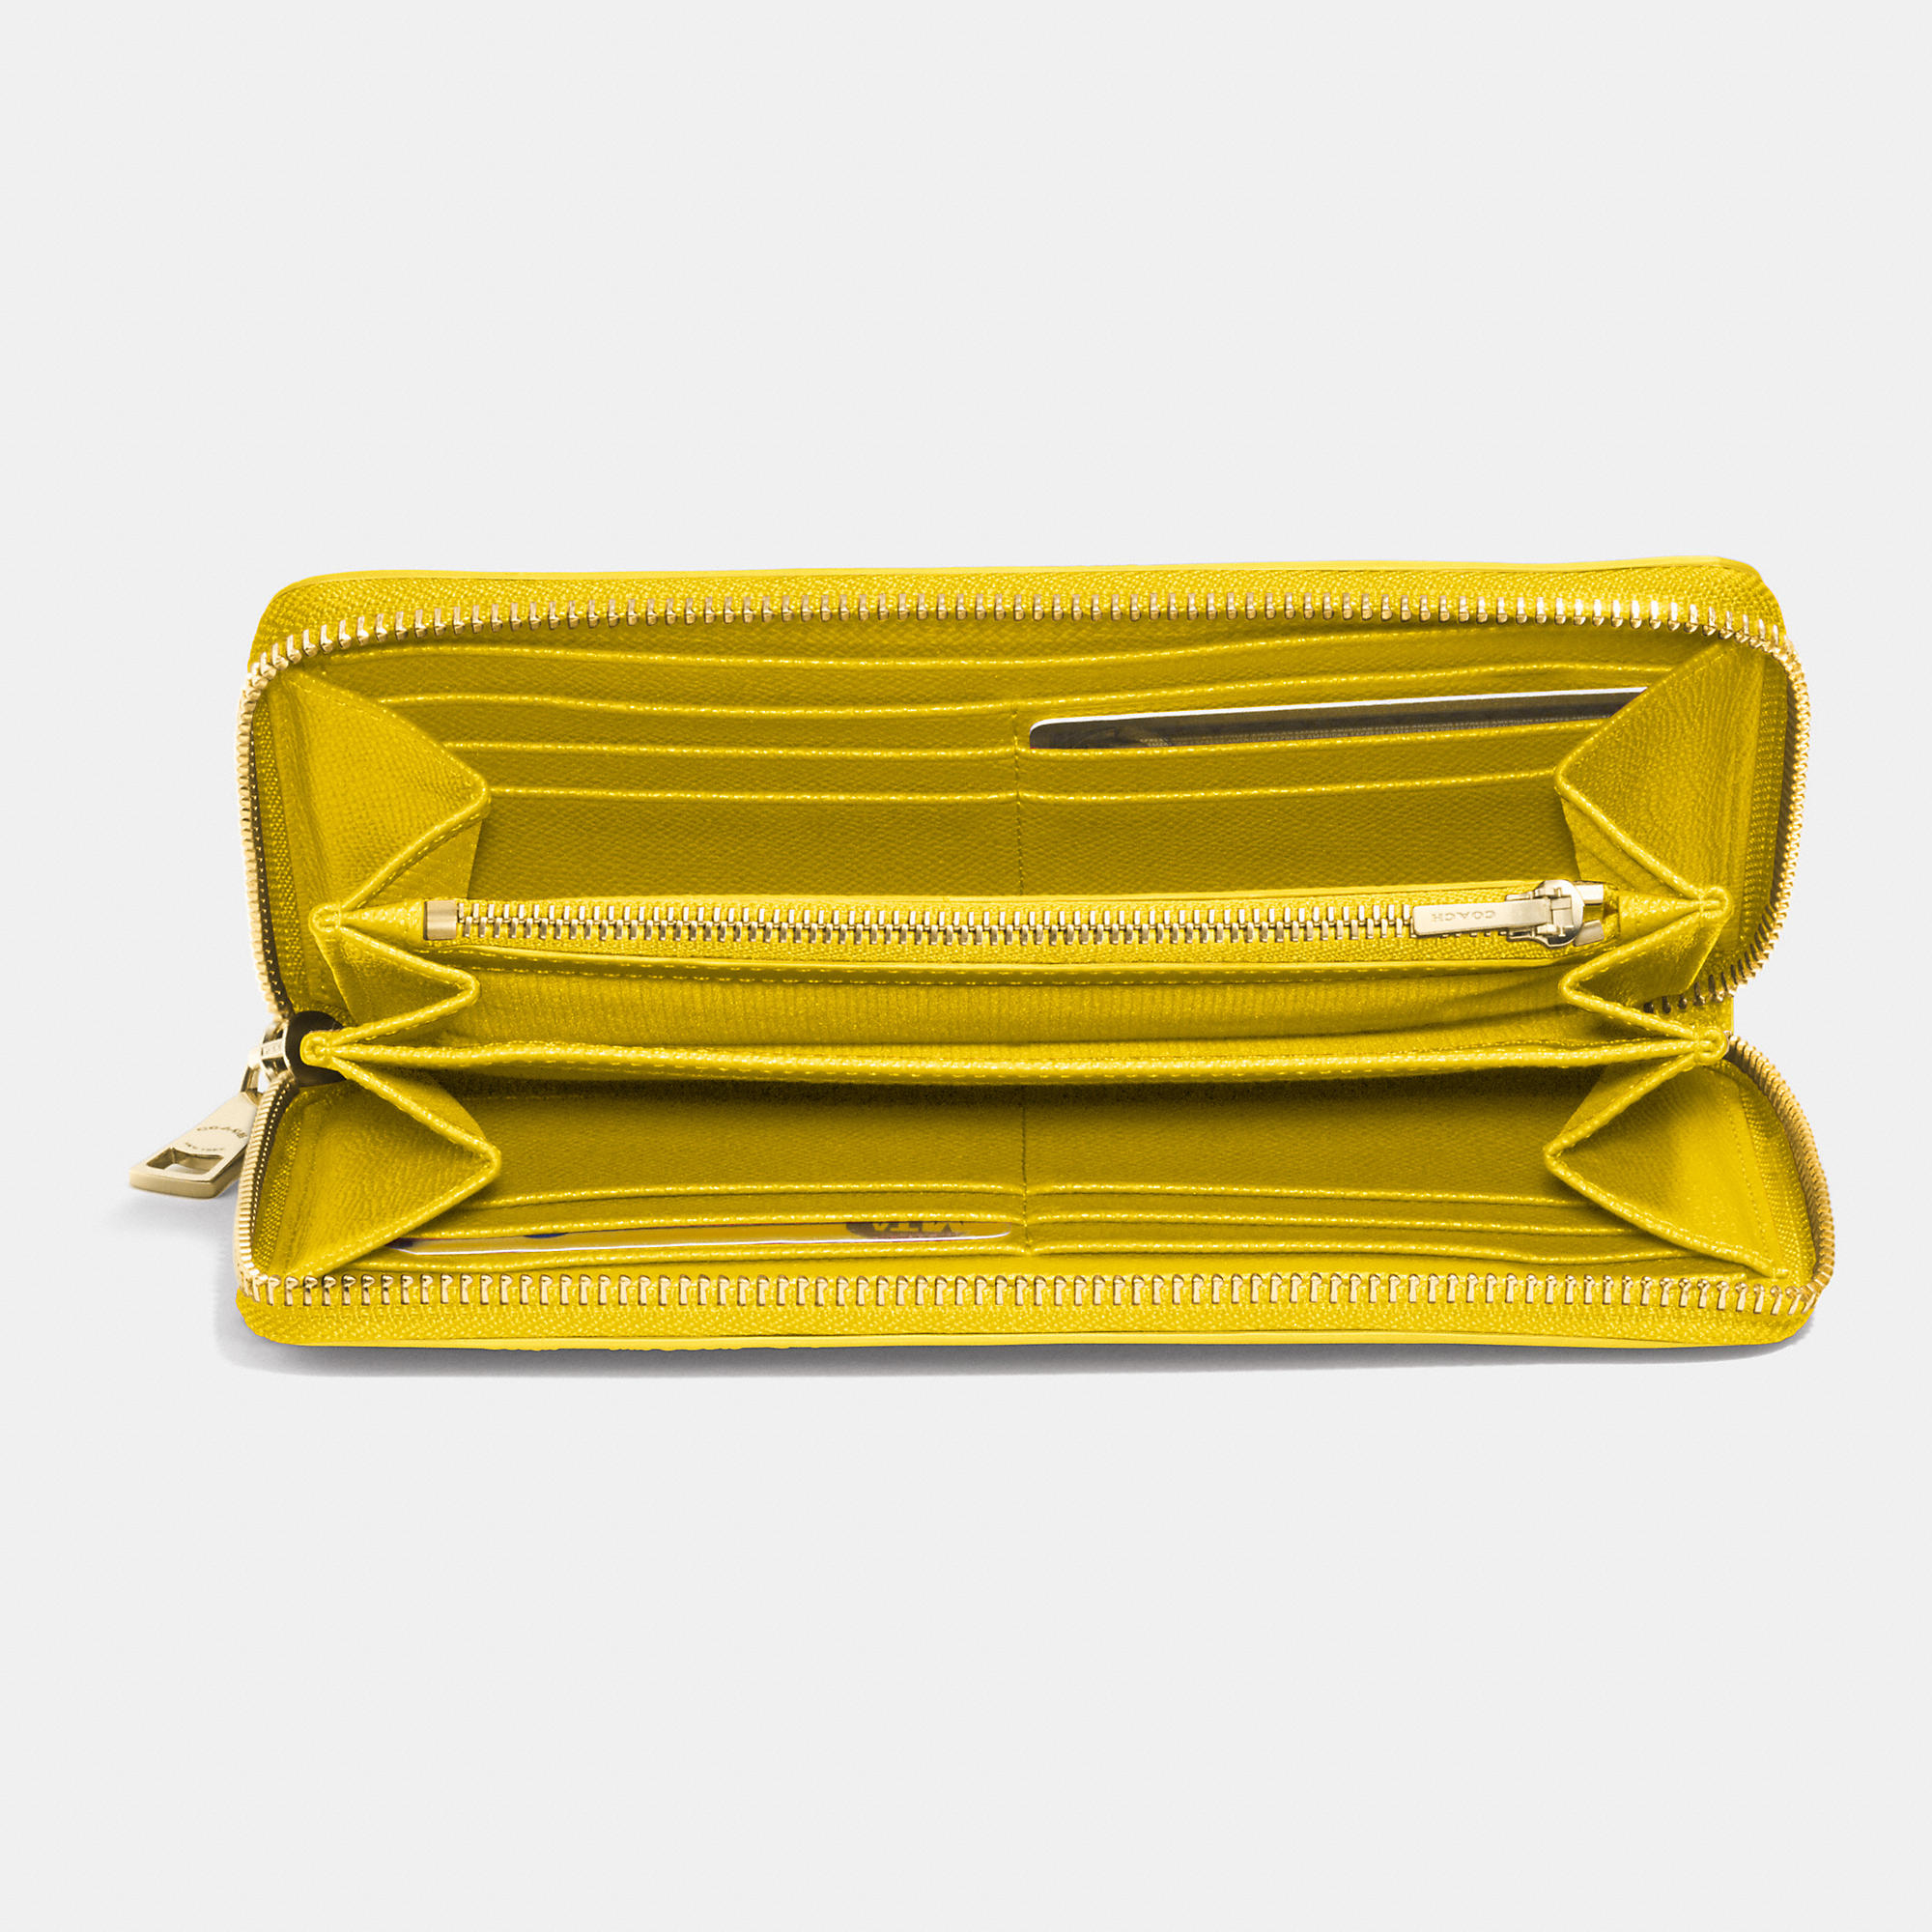 COACH Accordion Zip Wallet In Crossgrain Leather in Light Gold/Yellow (Yellow) - Lyst